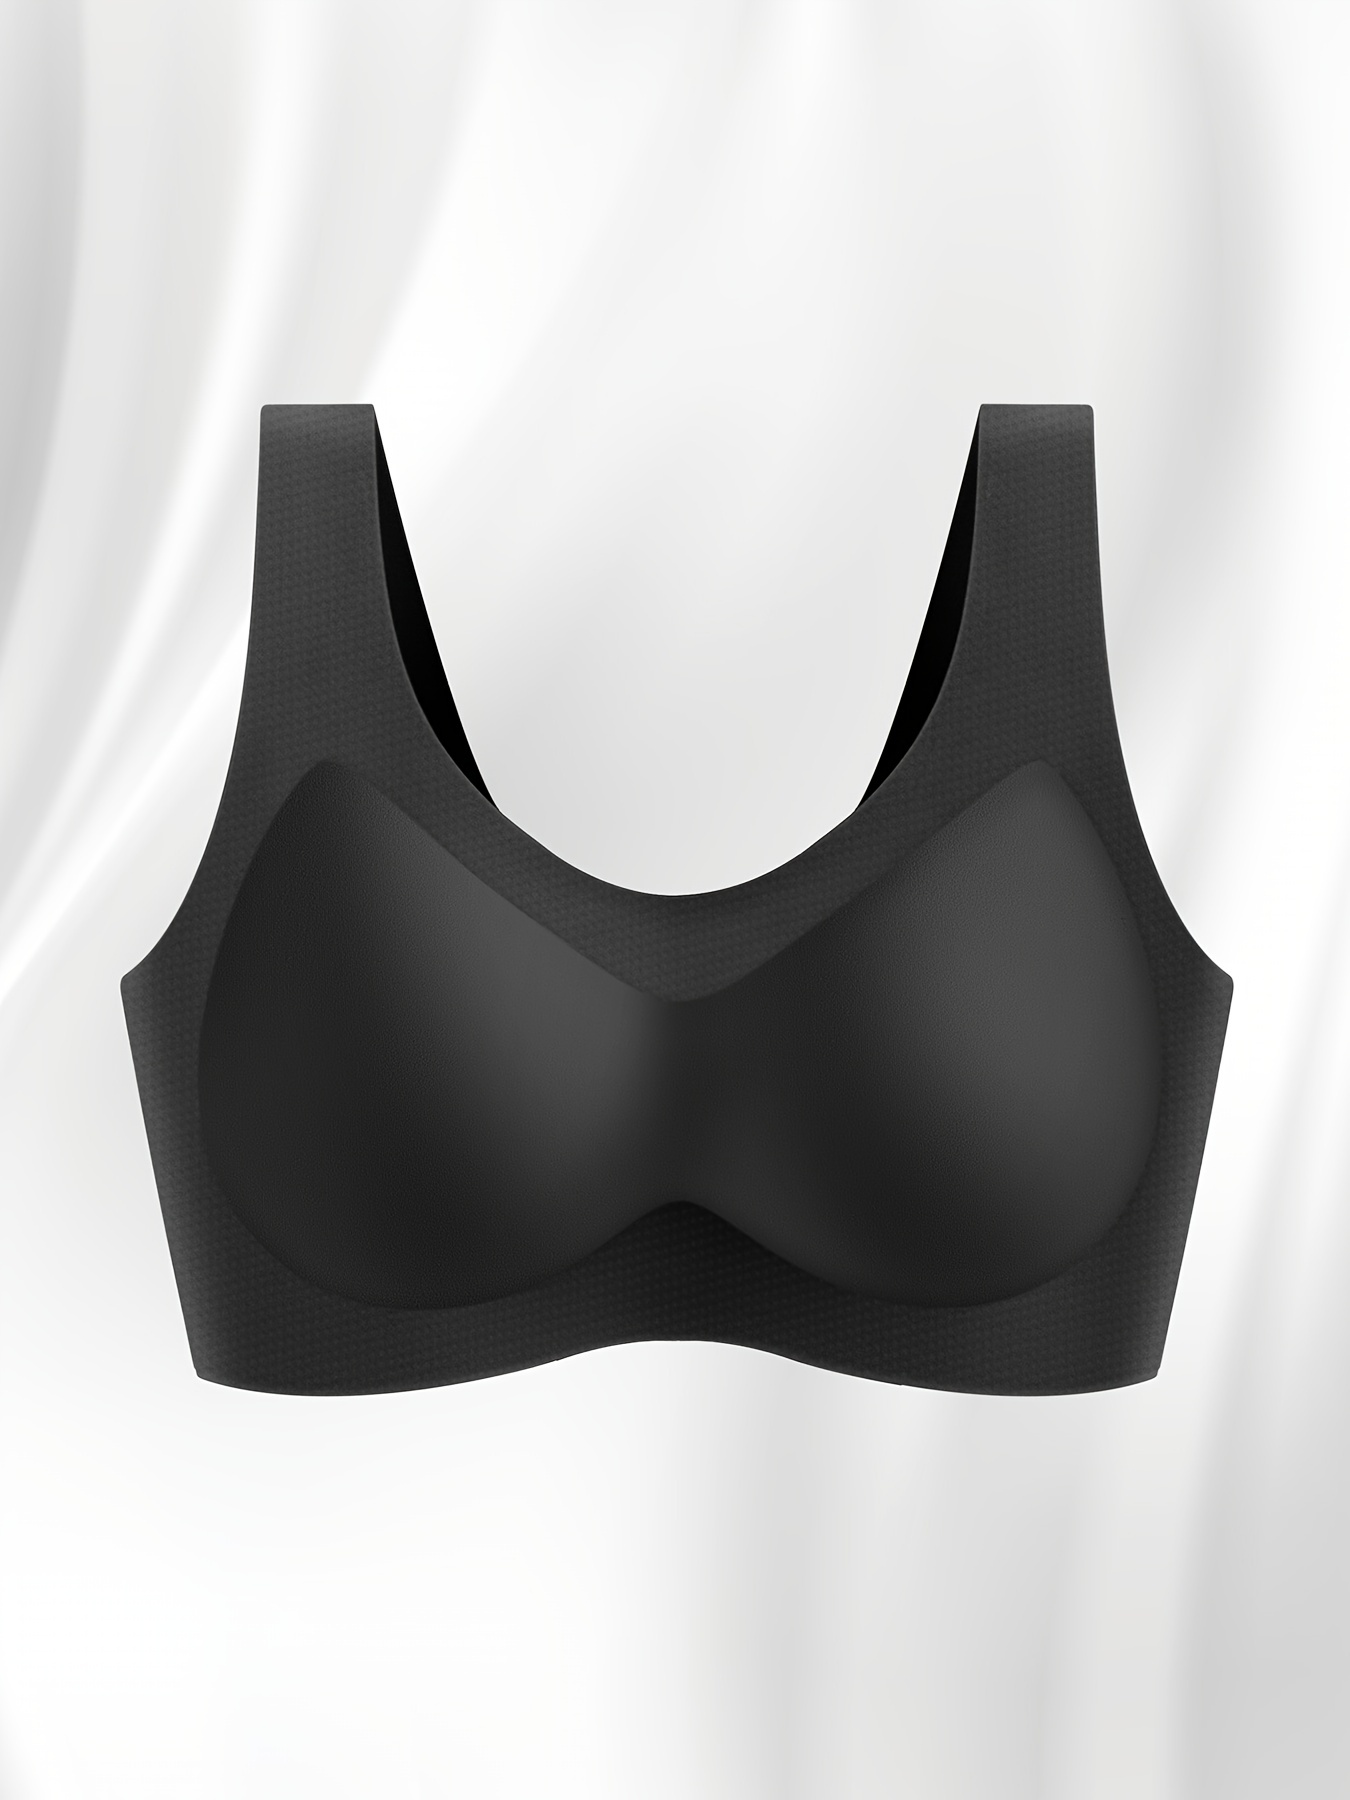 Seamless Vest Sports Bras Soft Comfy Full Coverage Intimates